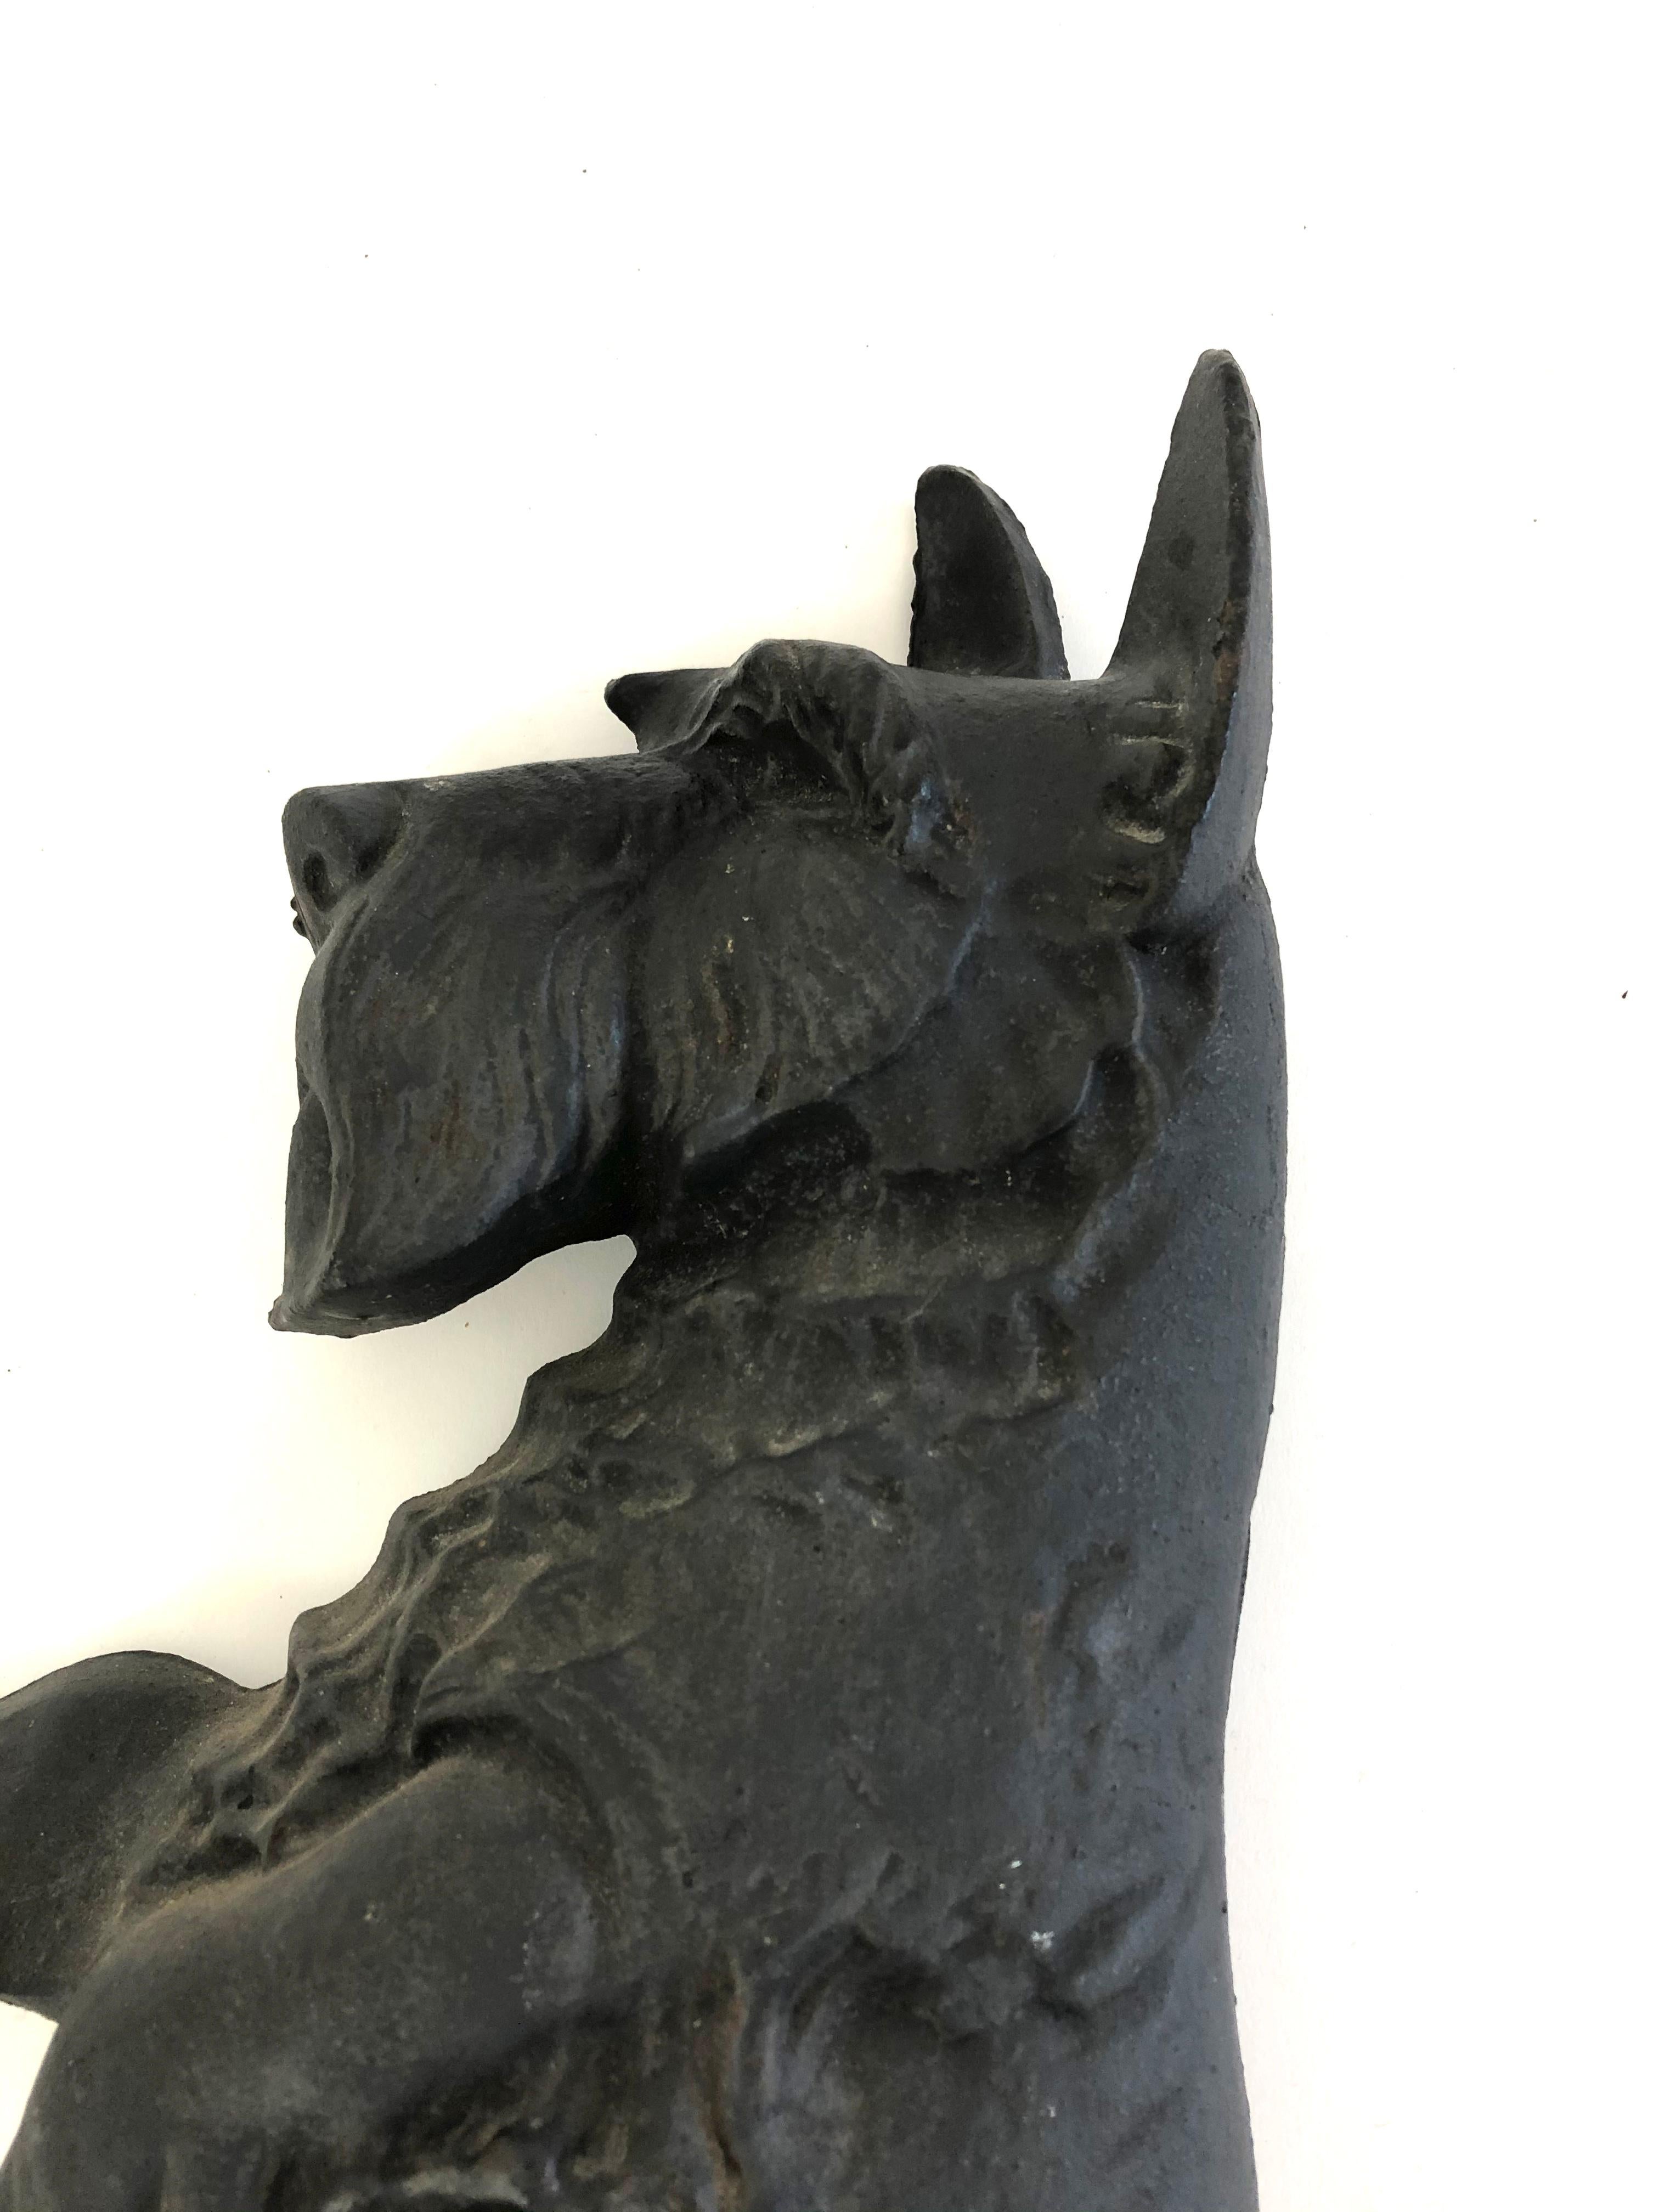 A well proportioned large black painted cast iron Scottish Terrier figure, modeled in relief and depicting an animated Scottie dog on its hind legs with two front paws extended. This would make for a wonderful wall or mantel decoration, as well as a